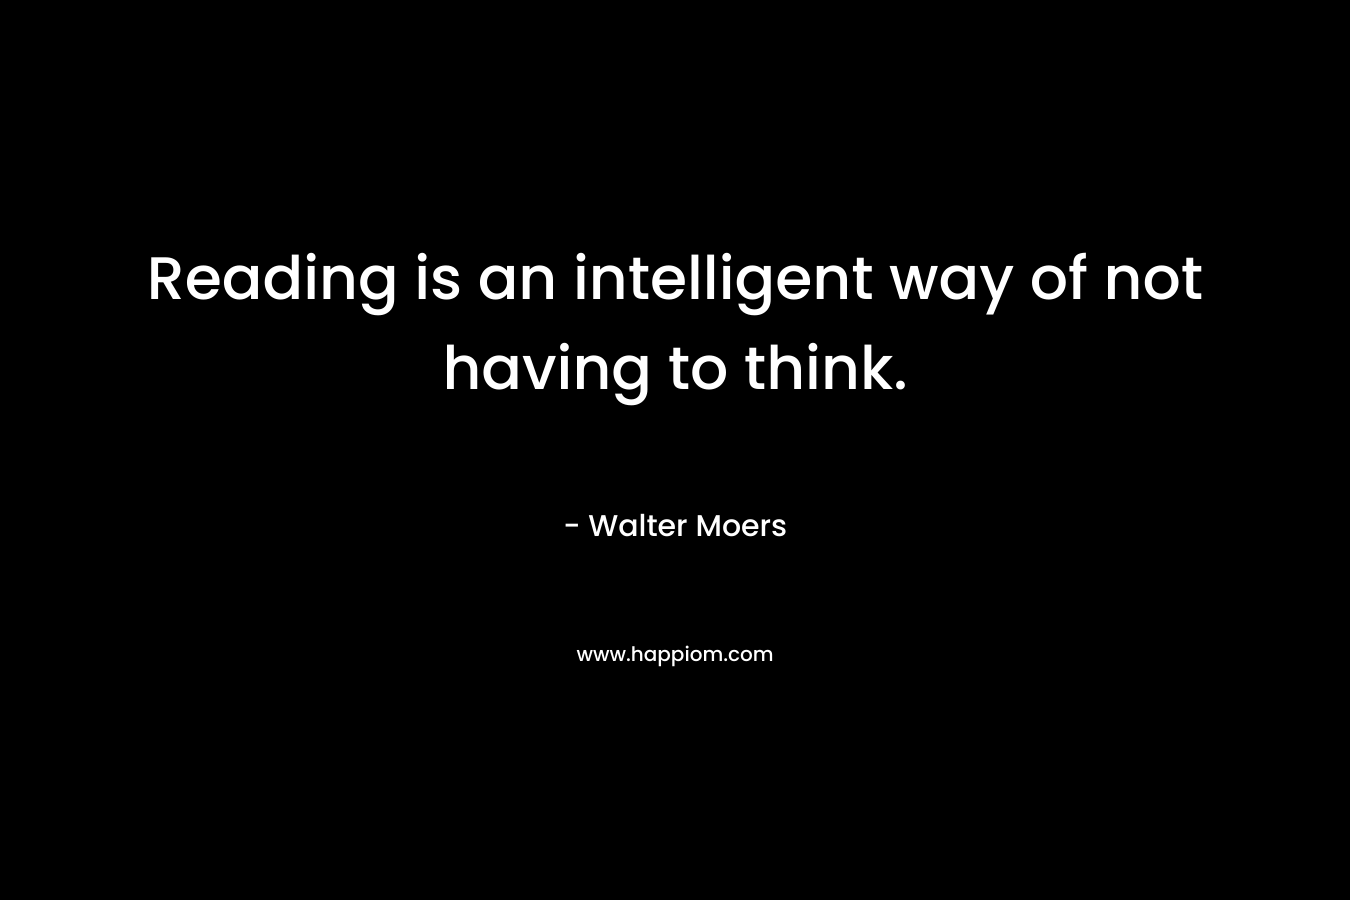 Reading is an intelligent way of not having to think. – Walter Moers